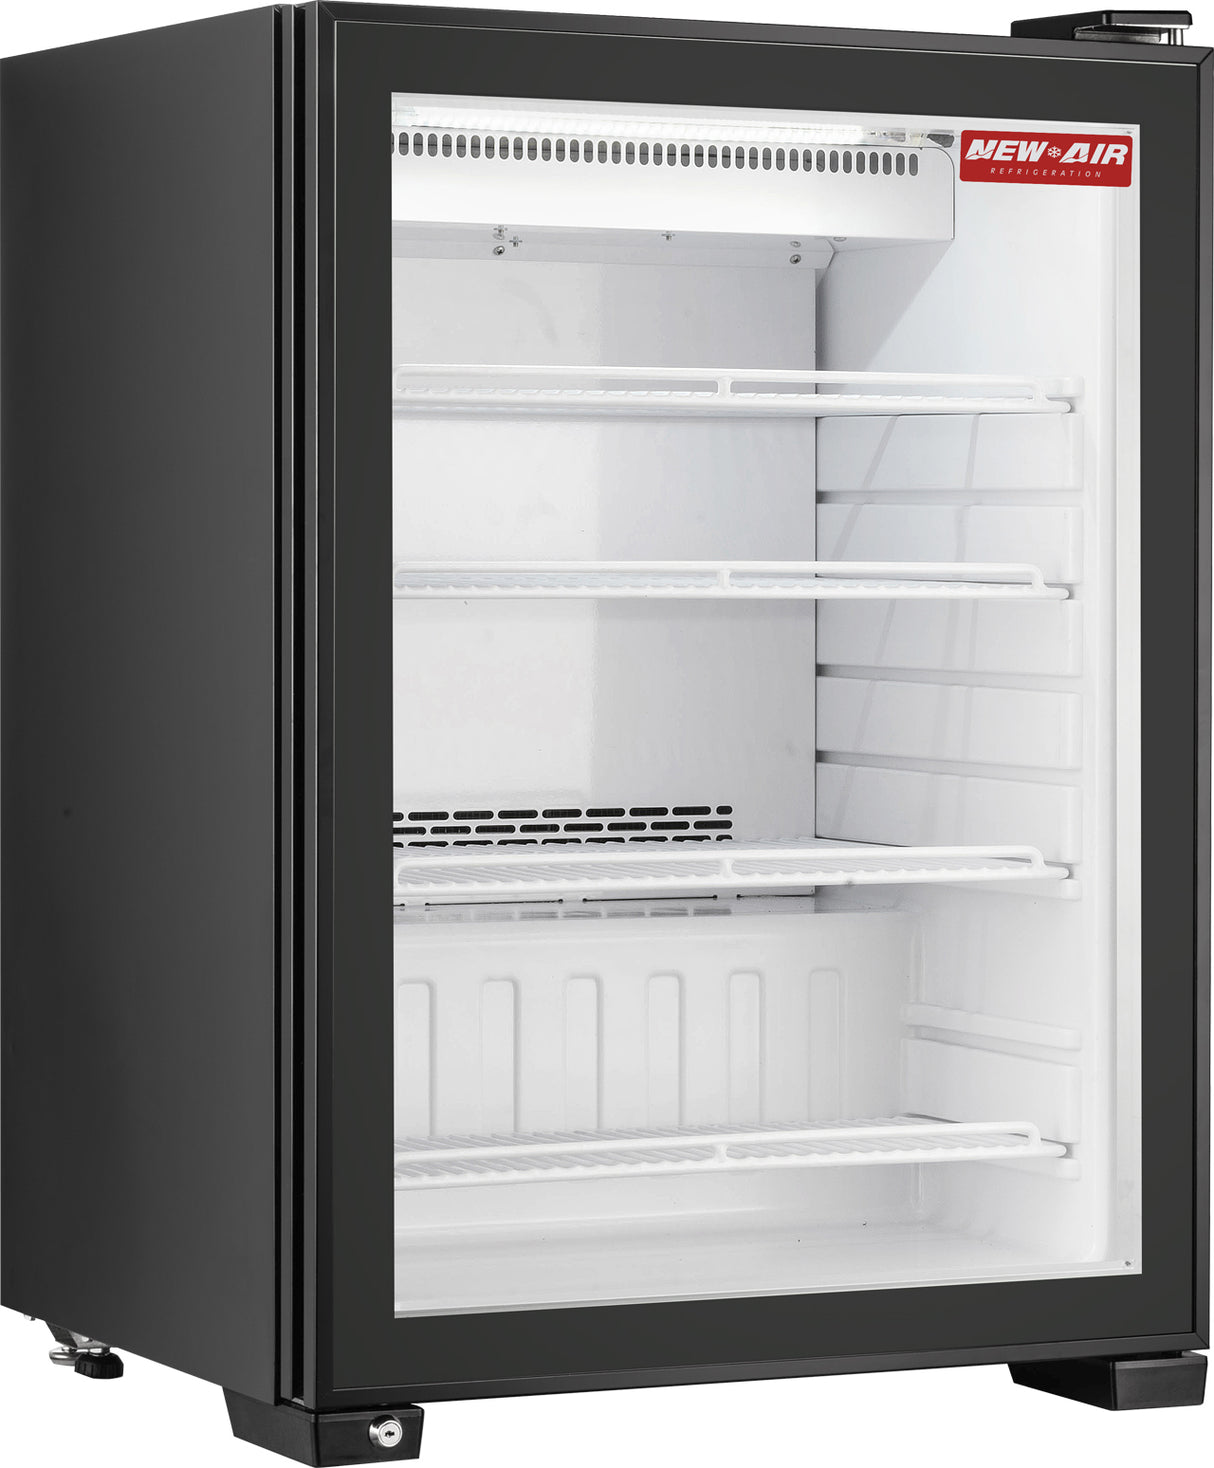 New Air NCR-24-35H 4.2 p3 refrigerator - 1 counter glass door